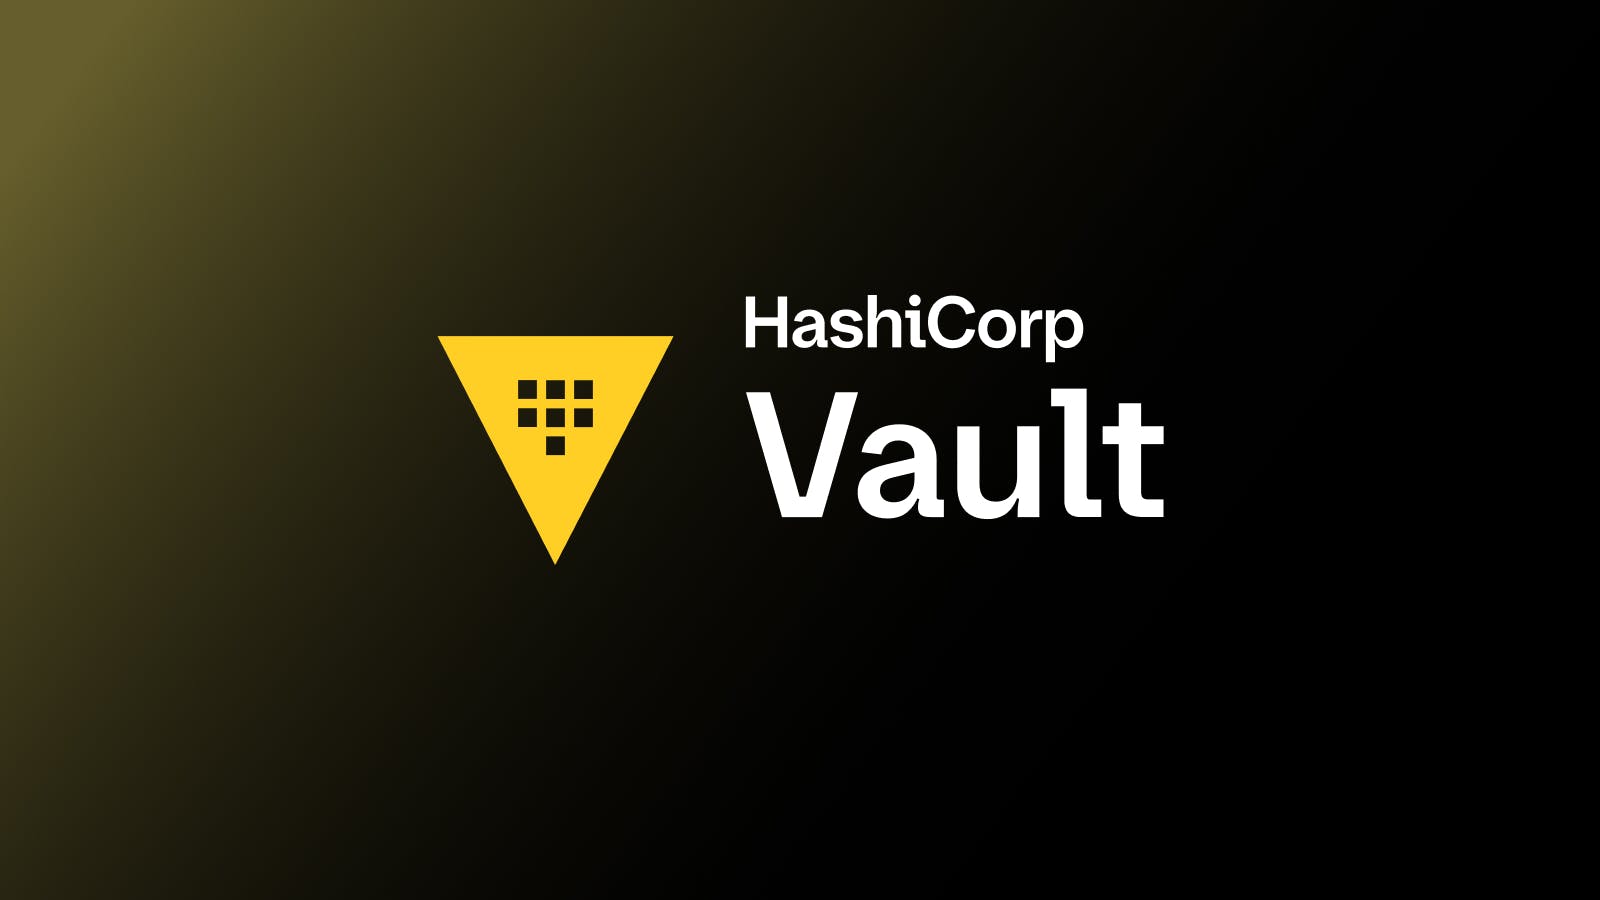 Code signing with HashiCorp Vault and GitHub Actions